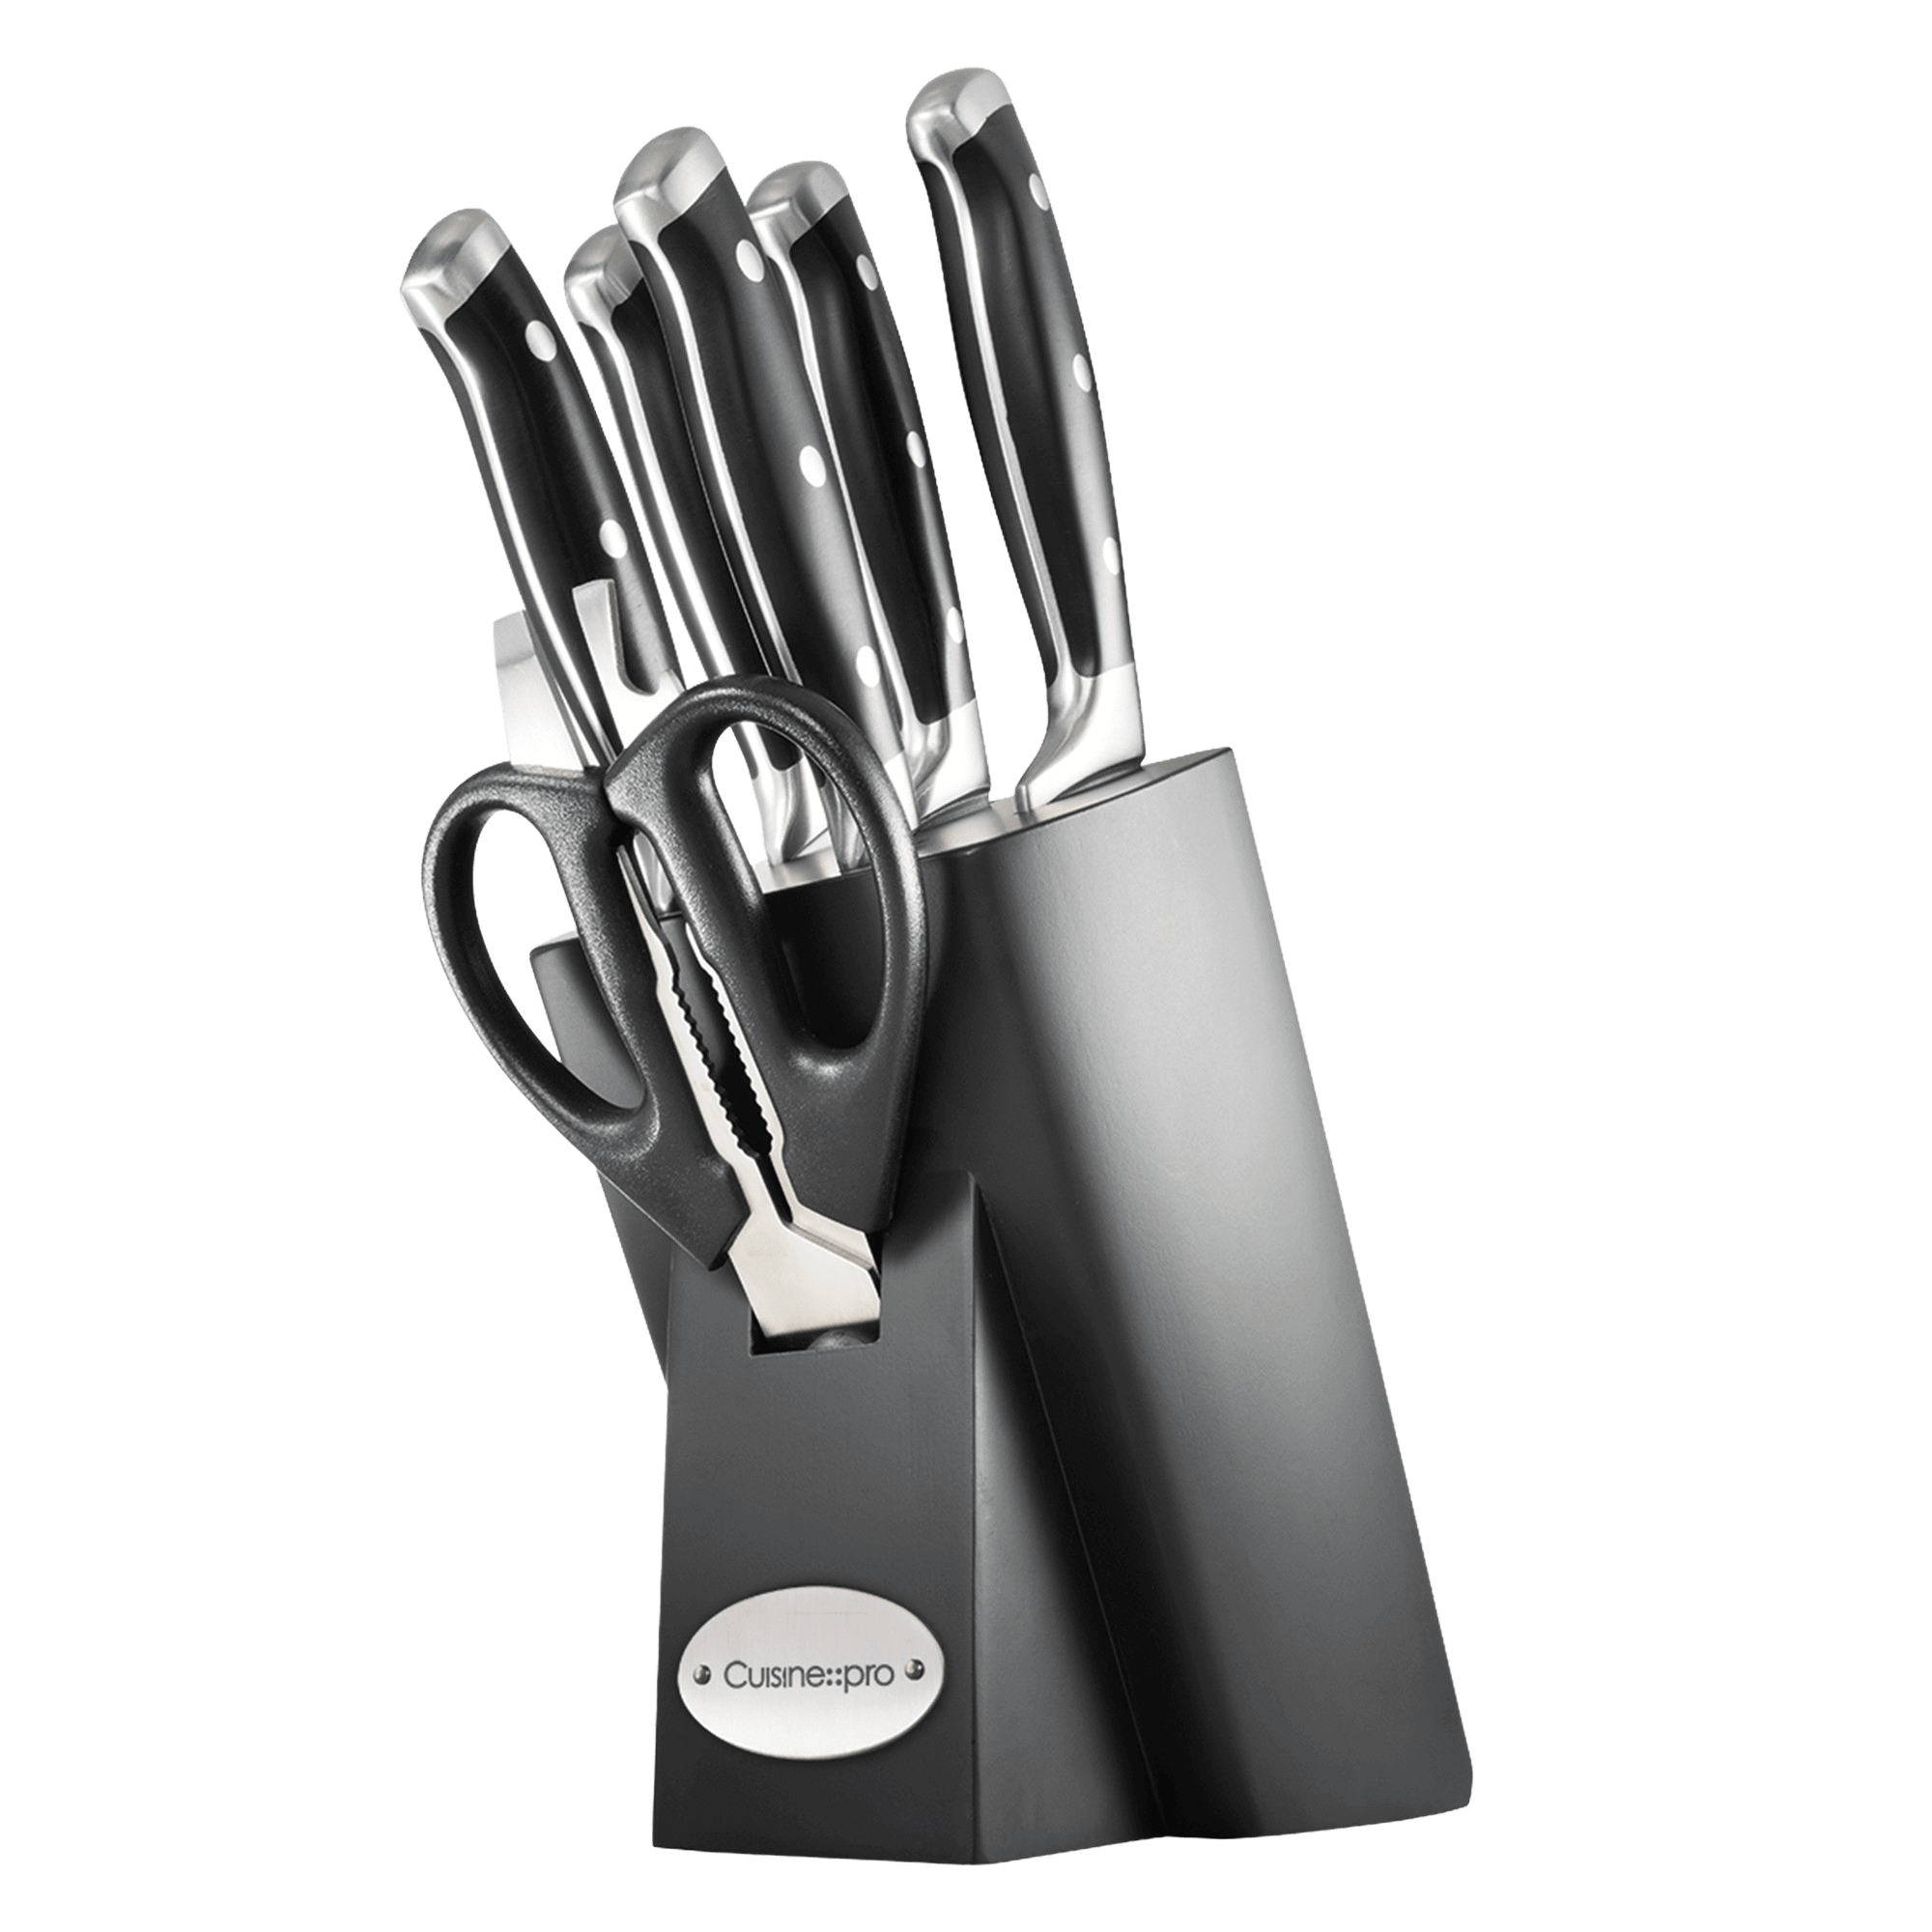 Cuisine::pro ARTISAN 6-Piece Stainless Steel Knife Set with Stahl